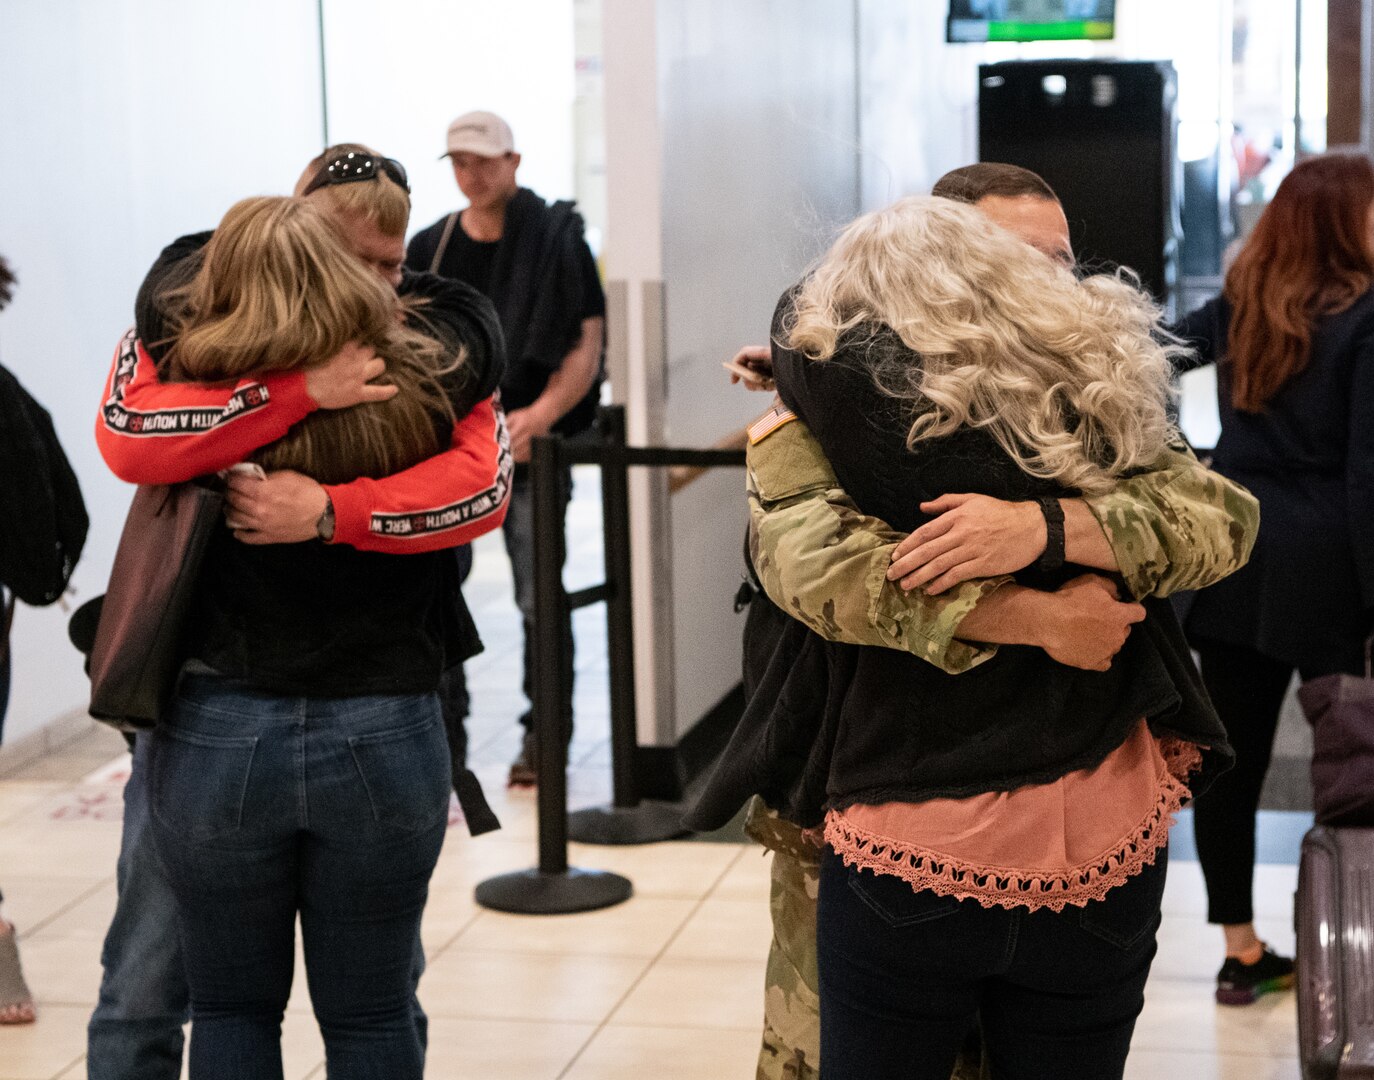 Senior leaders of the West Virginia Army National Guard and Soldier's family members recently welcomed the return to the United States of more than 130 Soldiers from the 3664th Support Maintenance Company (SMC) who completed a nine-month deployment to Kuwait.